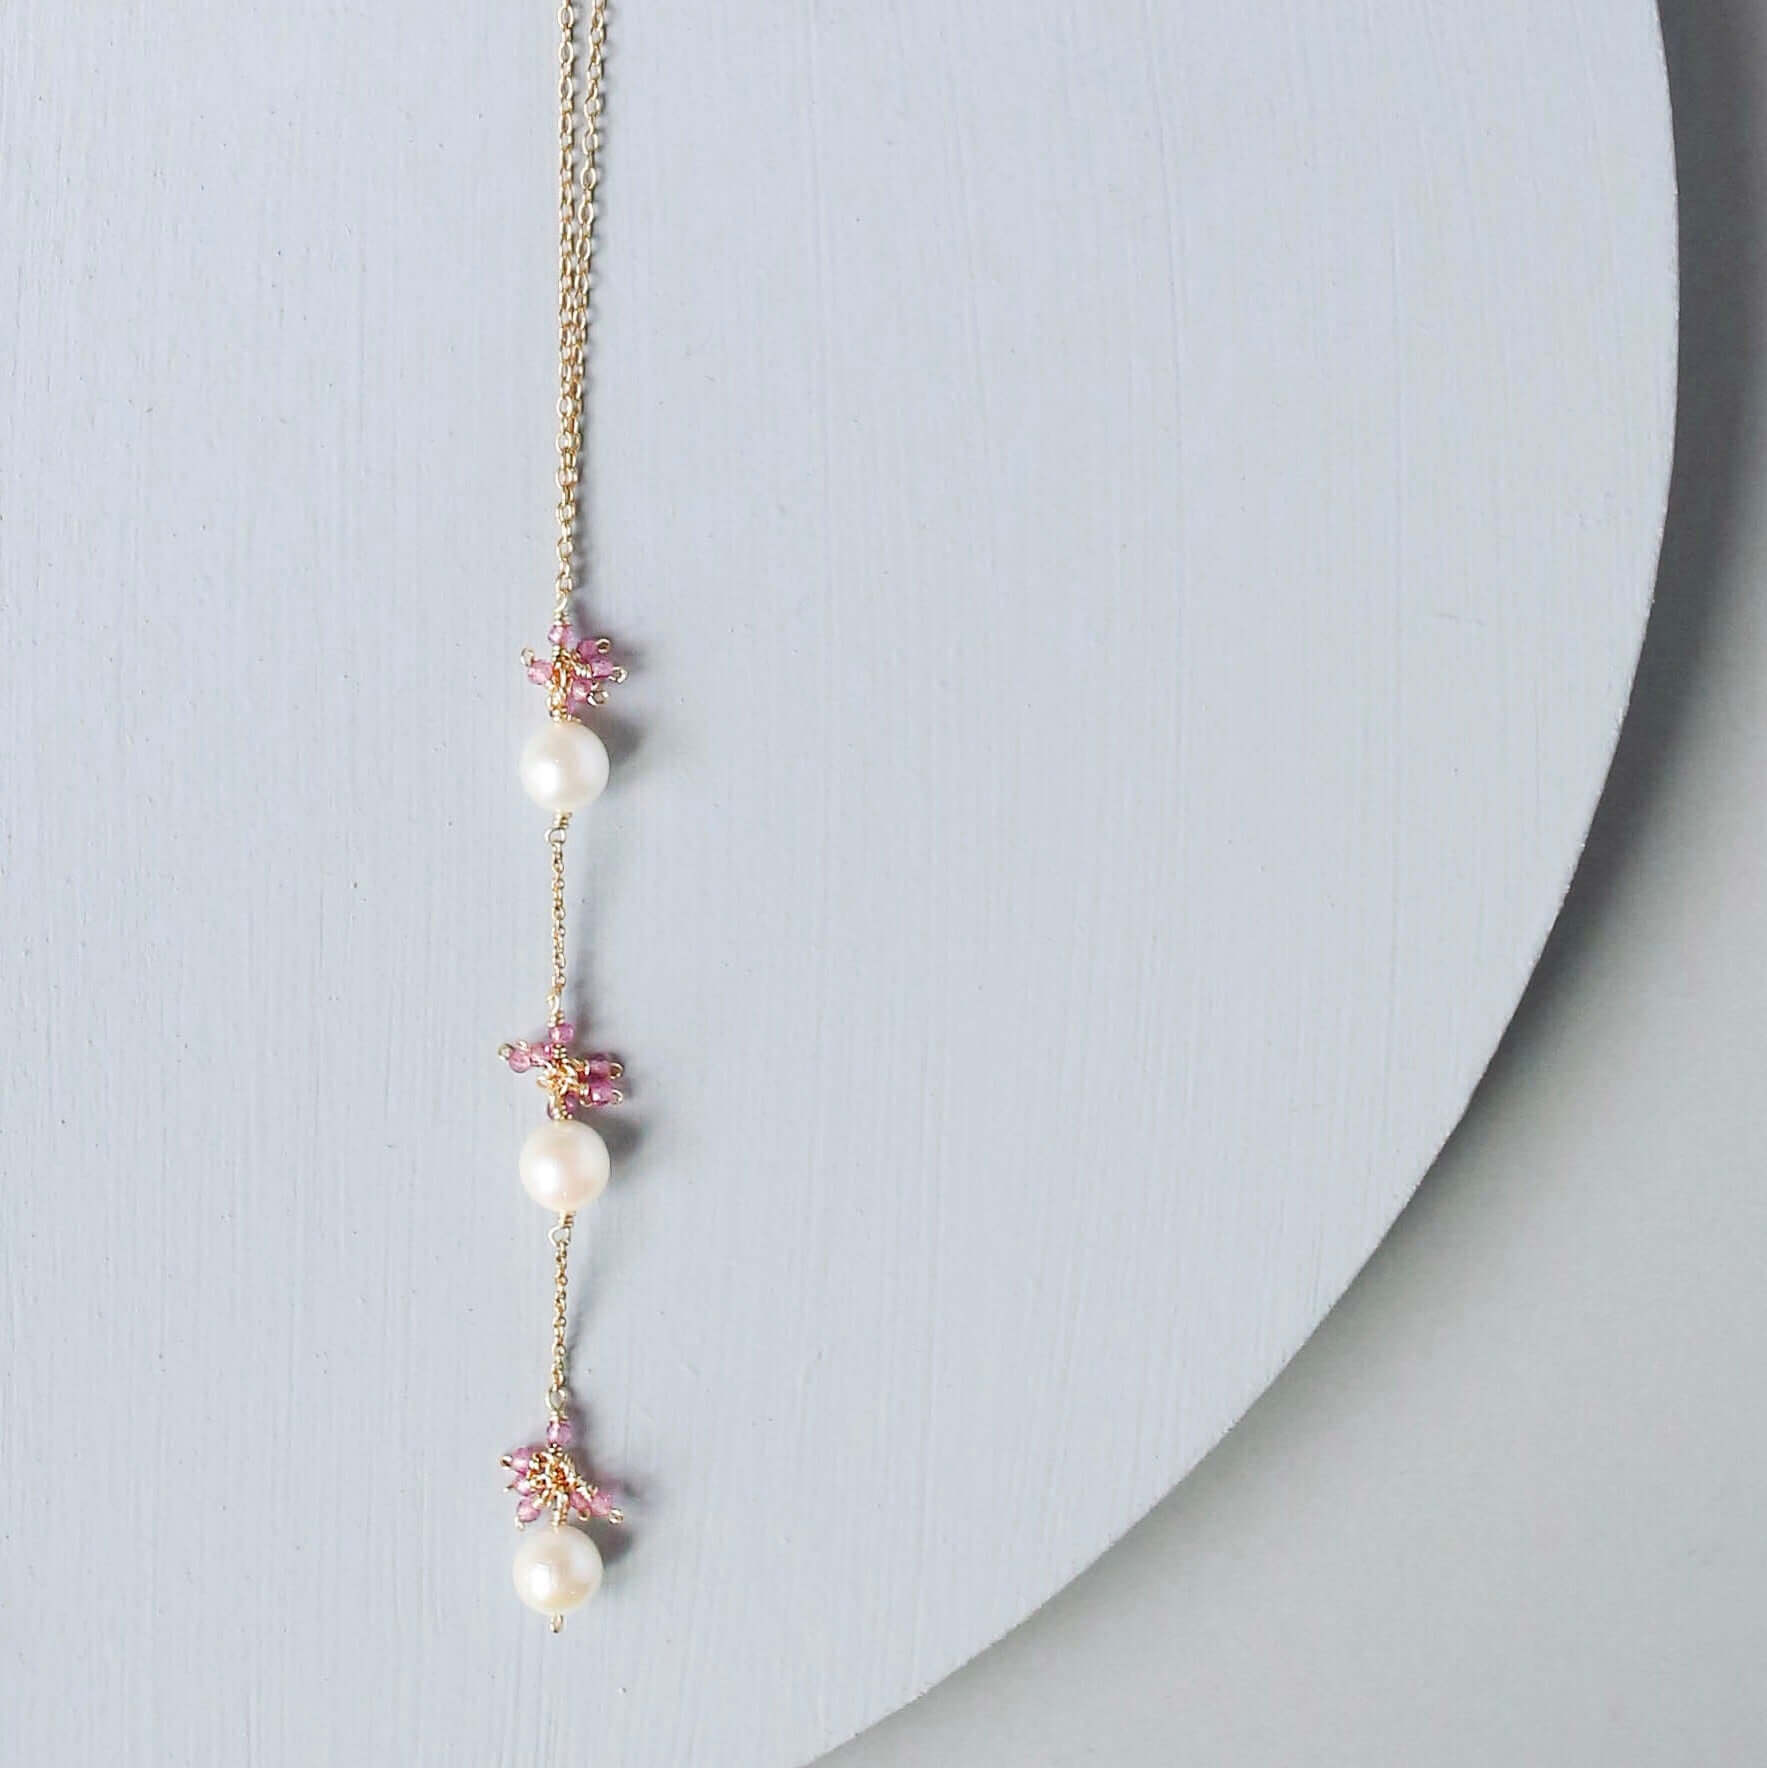 Gold plated Necklace with 3 white freshwater bead pearls paired with genuine rose quartz gemstones